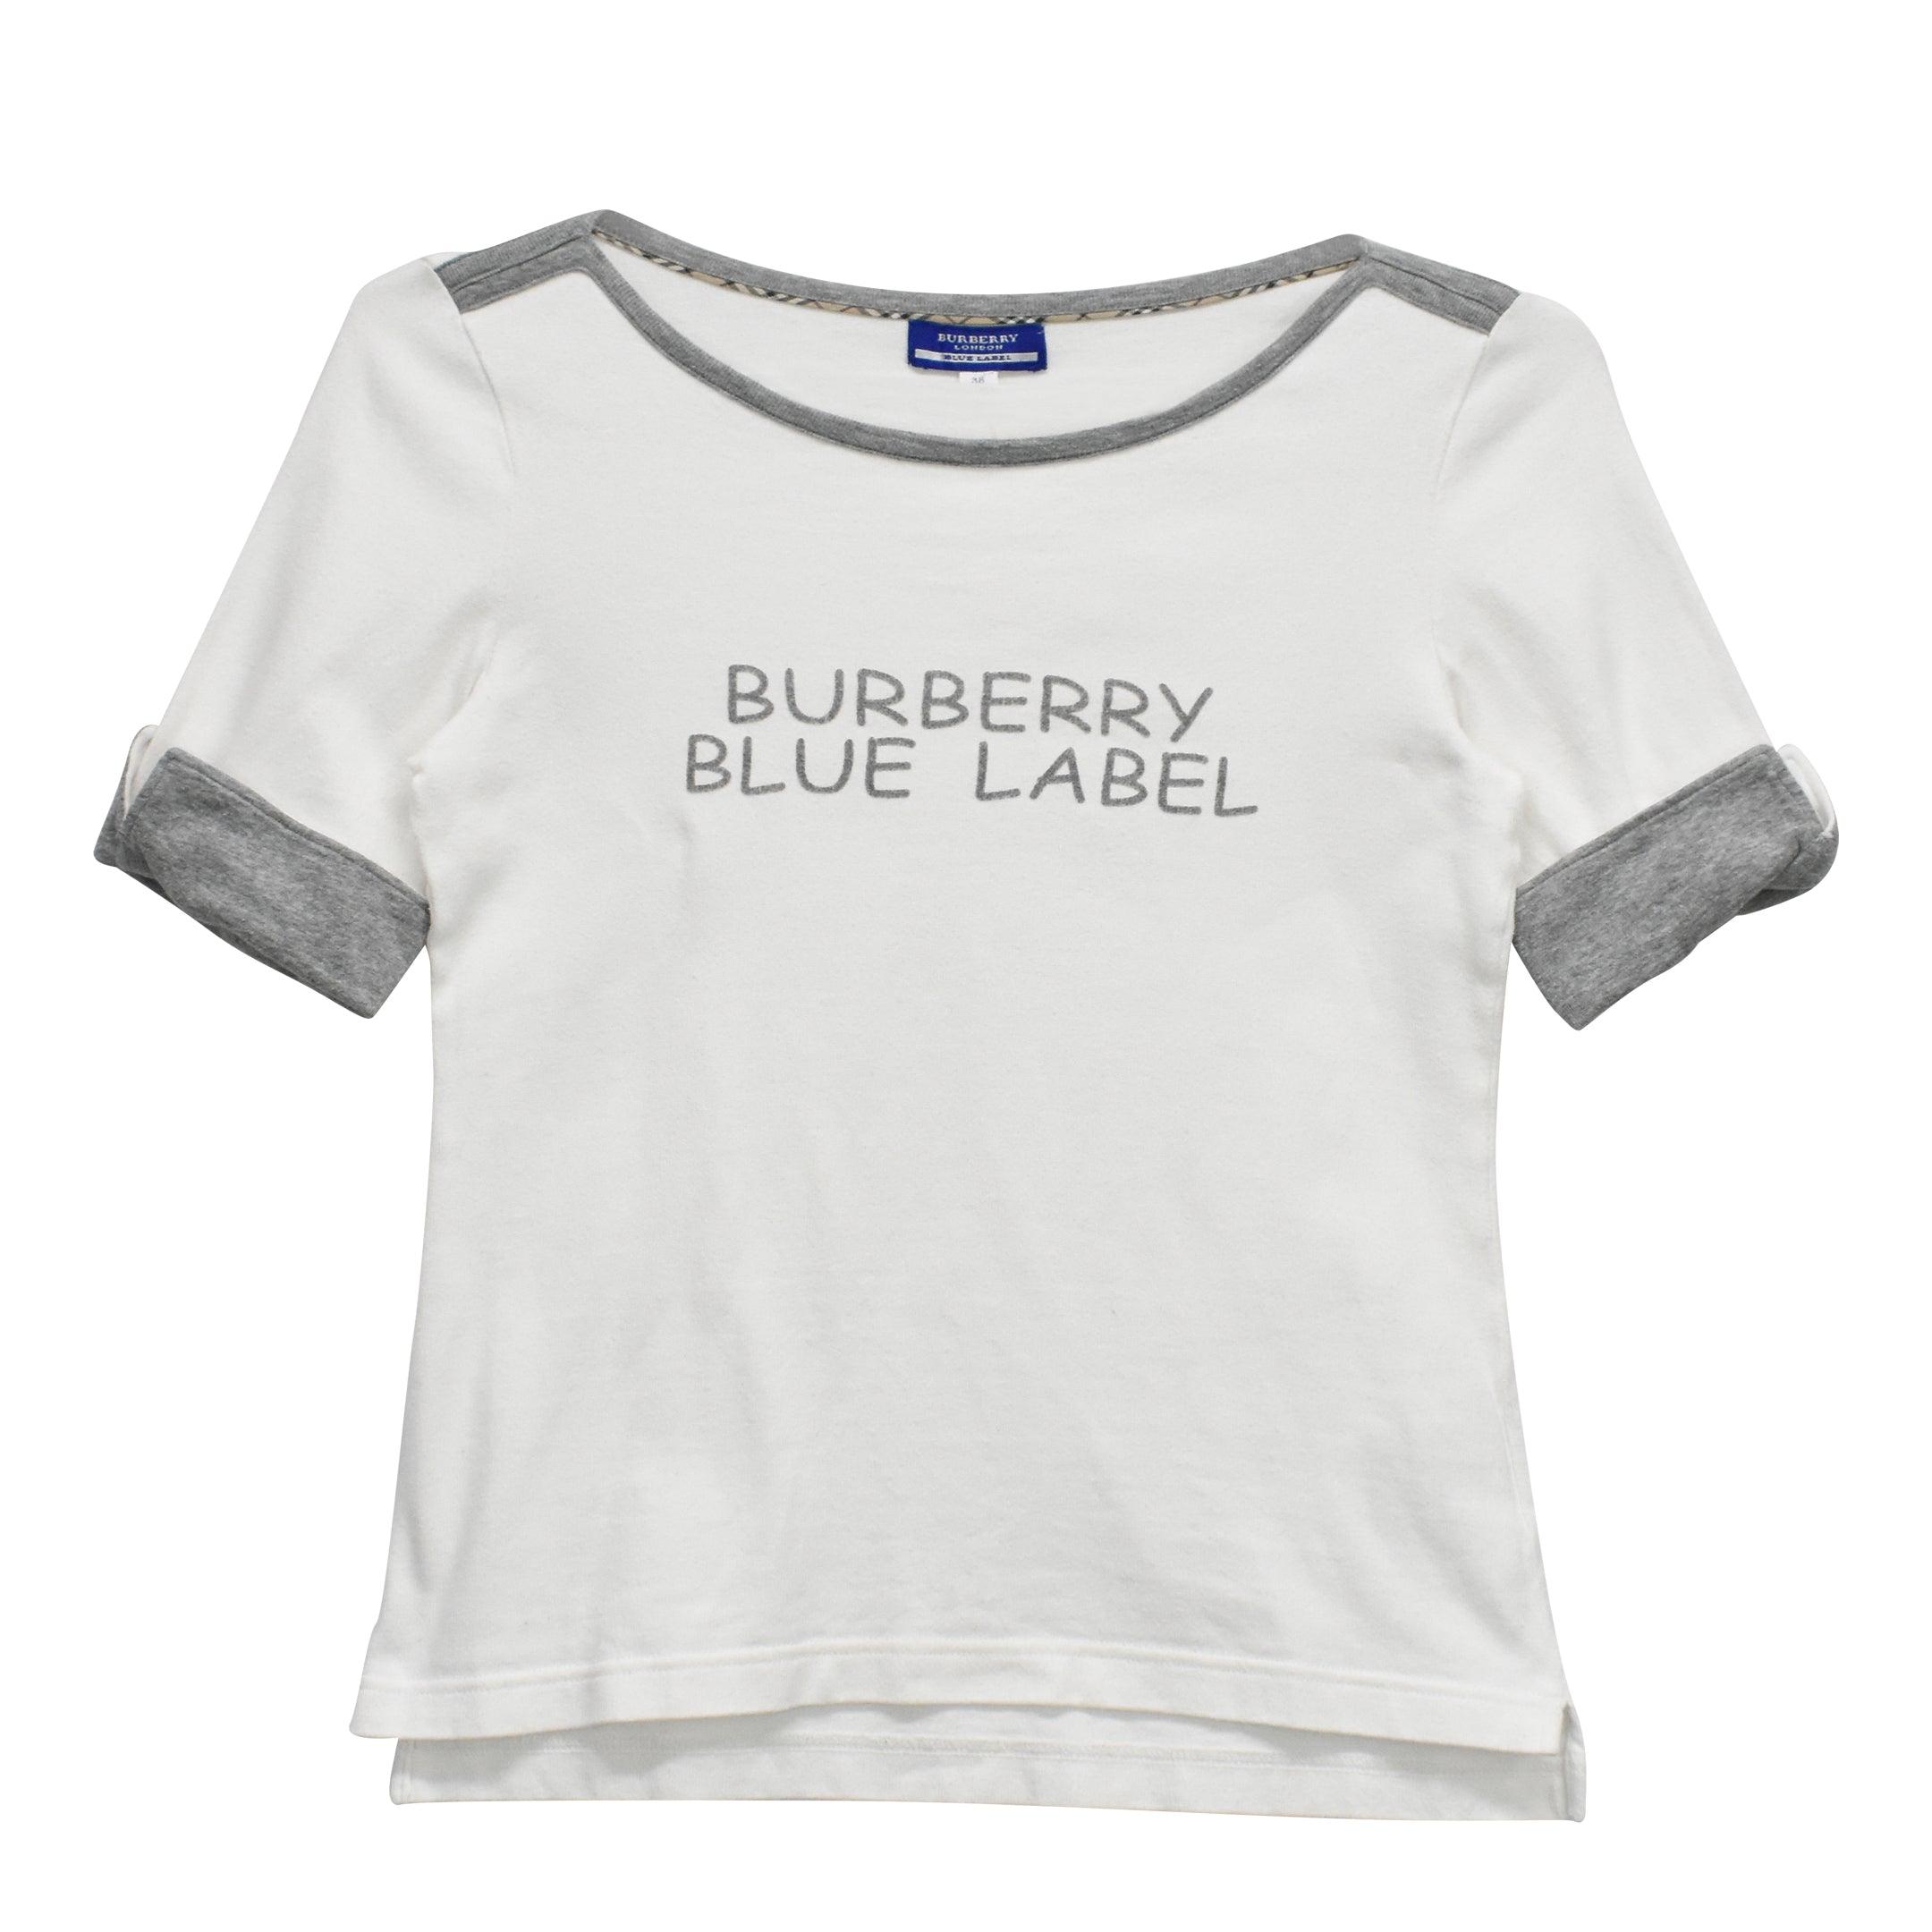 Burberry Blue Label T-Shirt - Women's 38 – Fashionably Yours